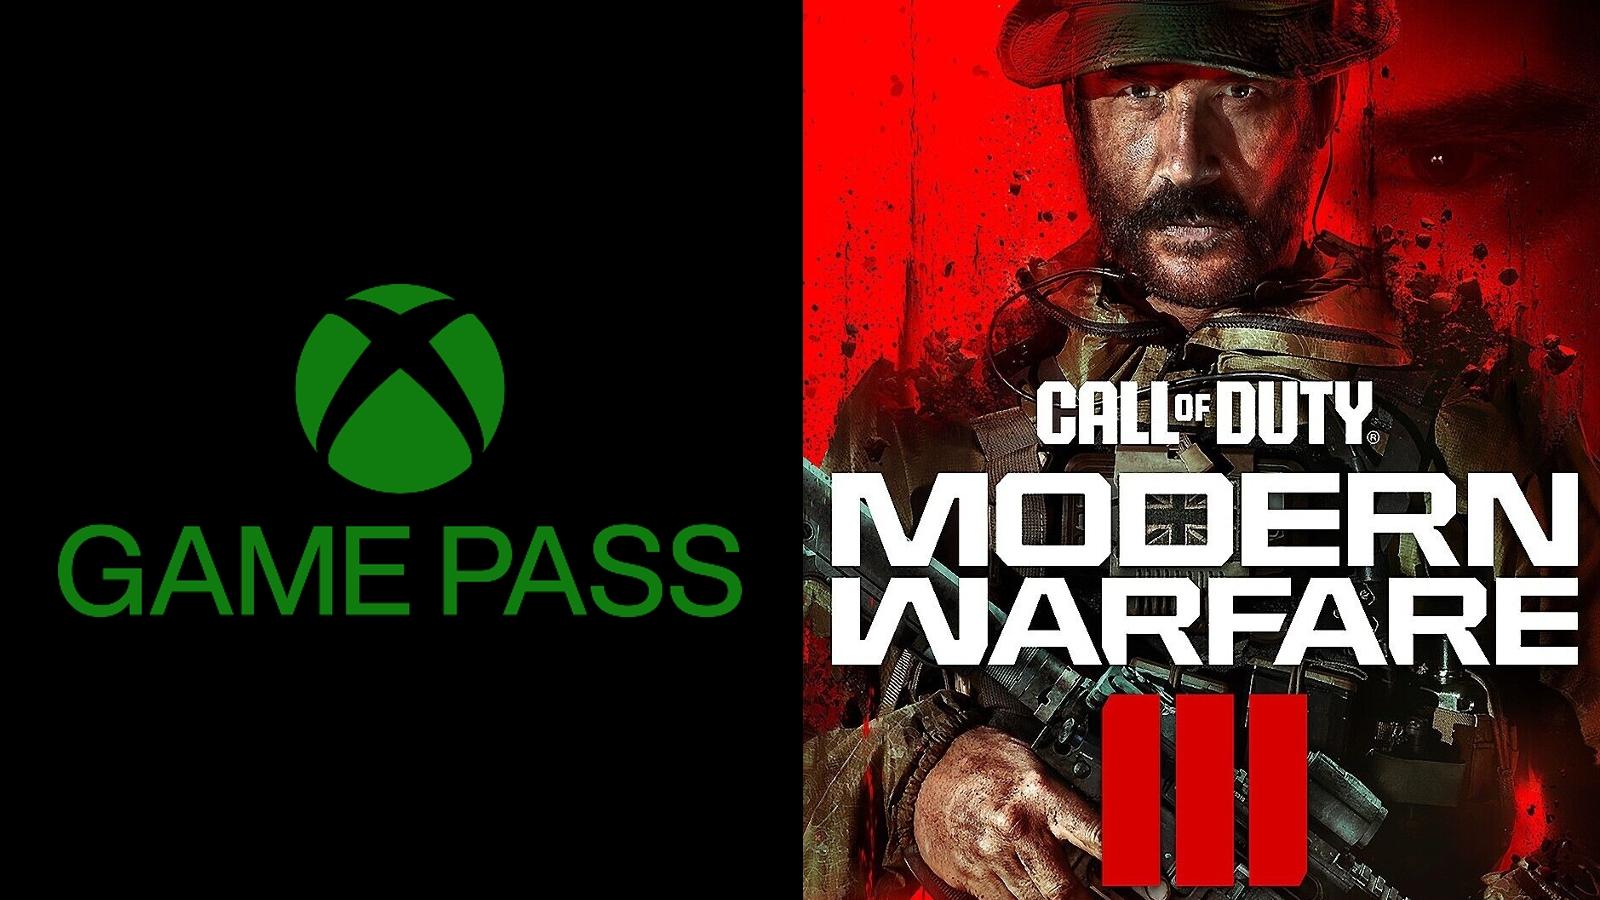 side by side image of xbox game pass logo and modern warfare 3 cover art